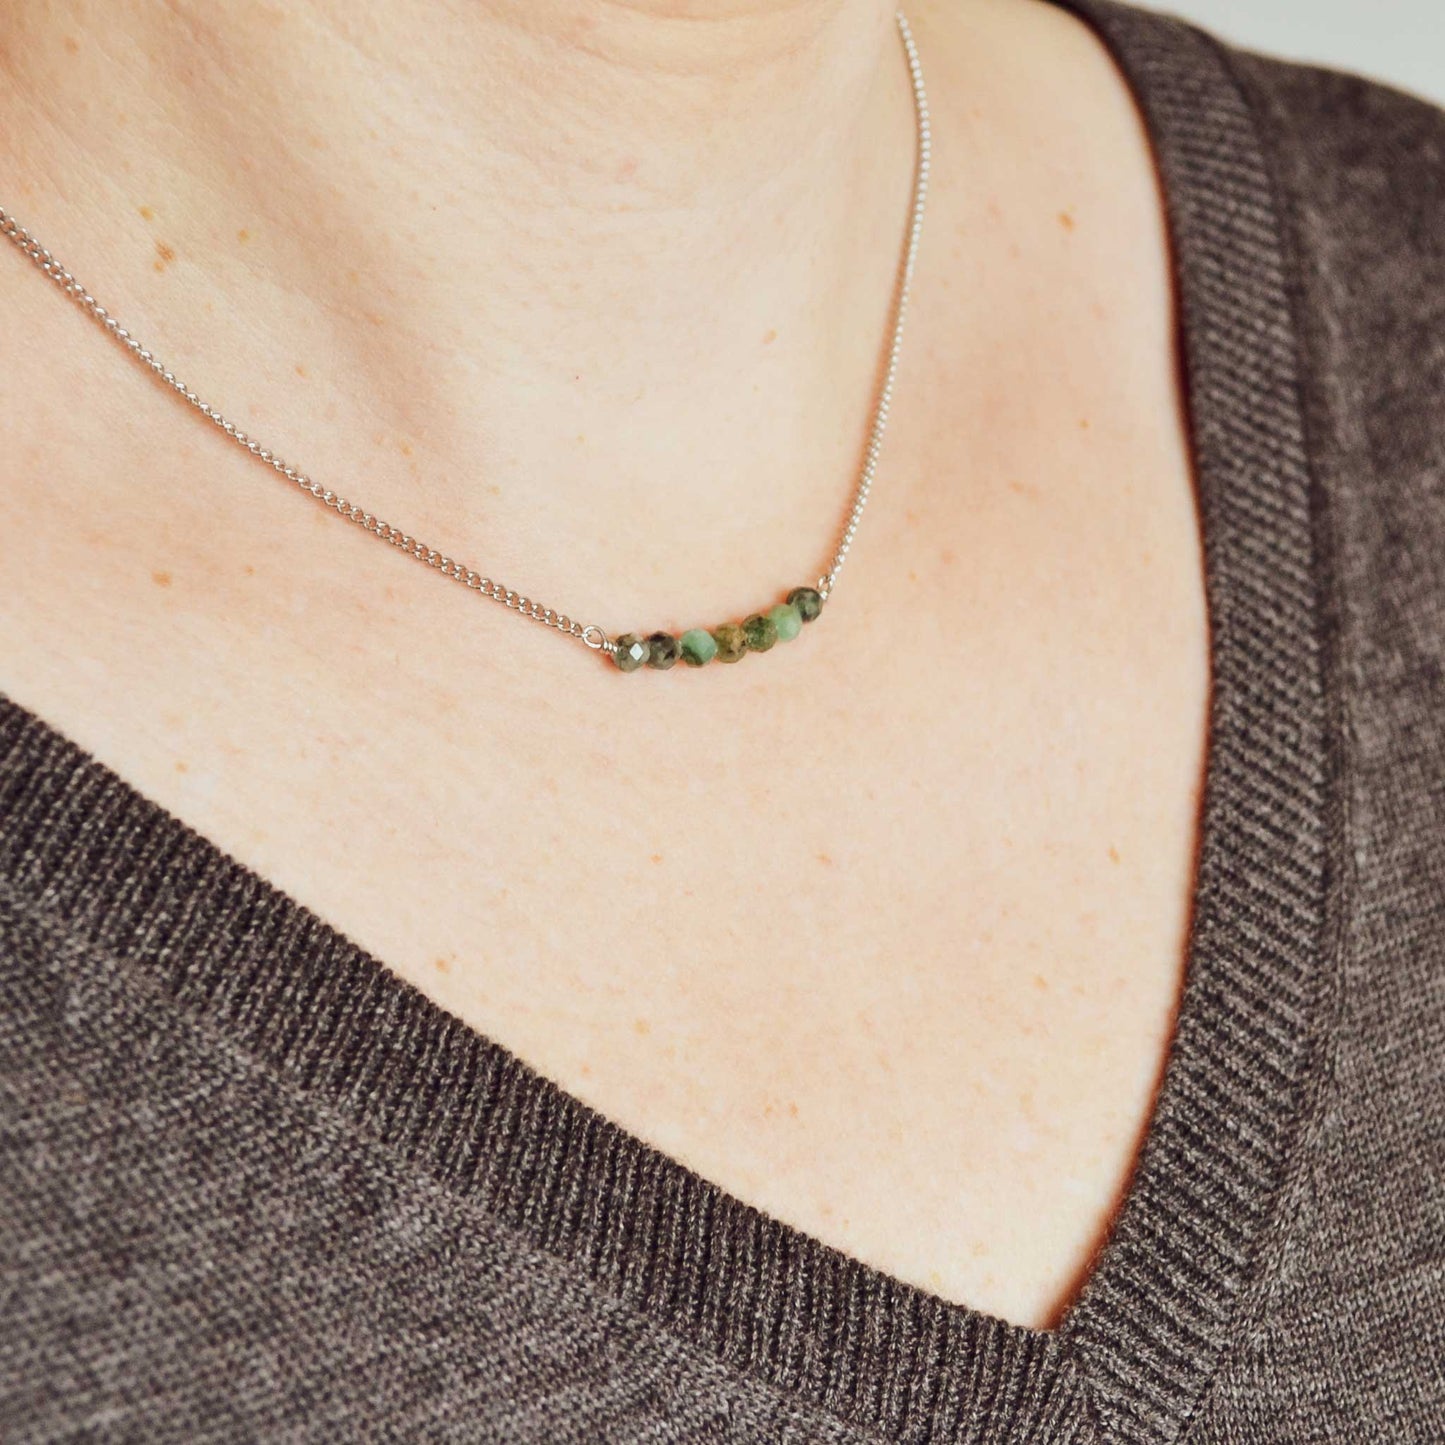 Woman wearing grey v neck jumper and dainty necklace with Emerald stones